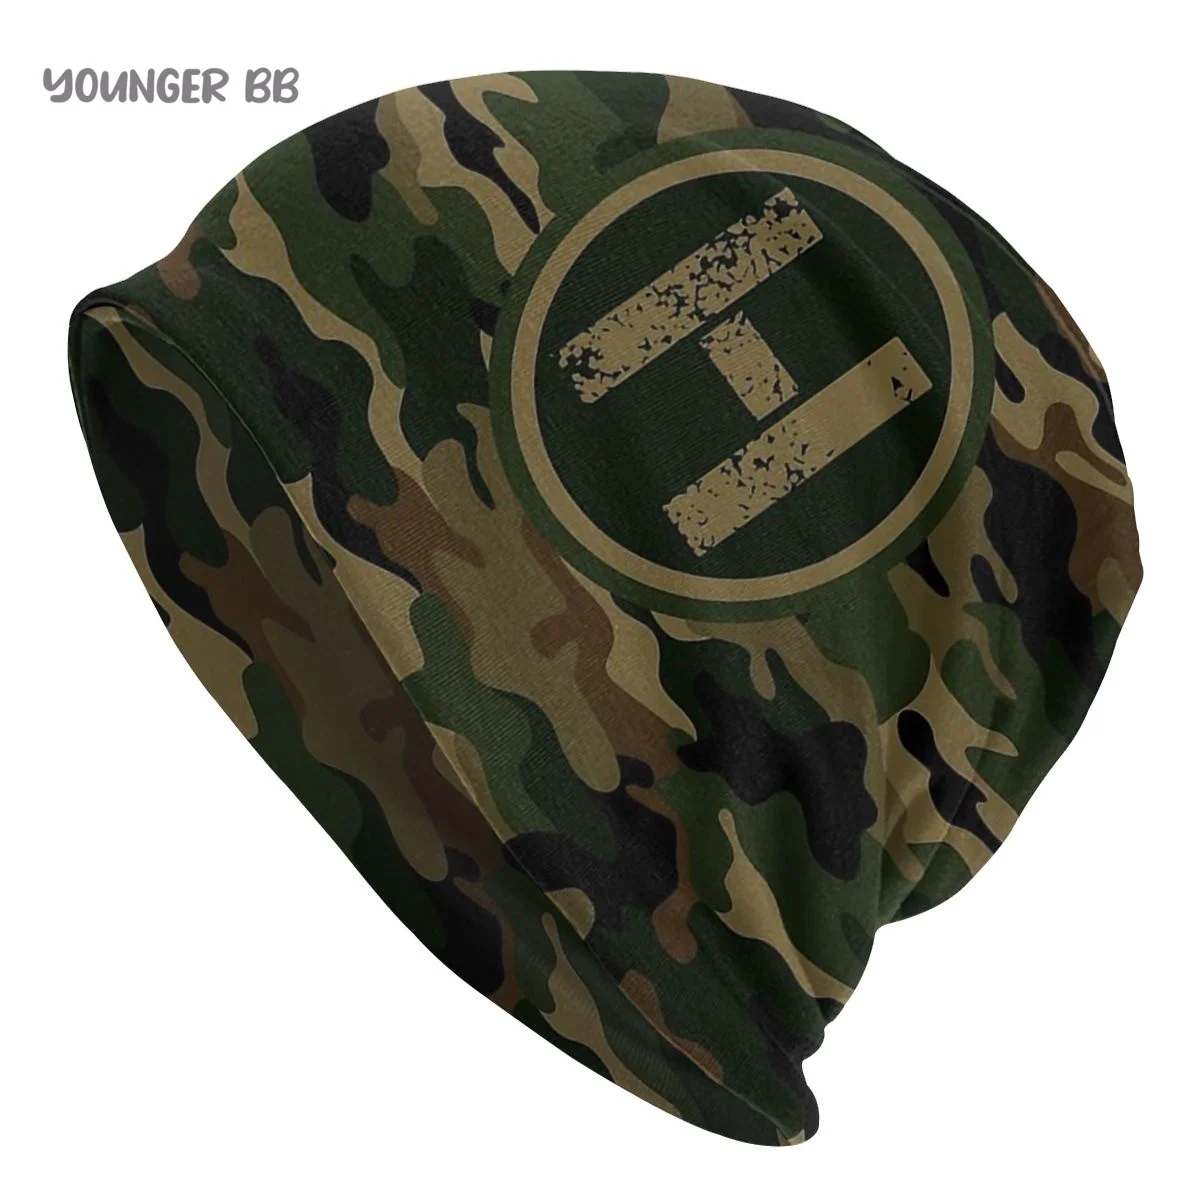 

Bonnet Hats Men Women's Knitting Hat Monogram Initial Letter H Military Army Camouflage Warm Cap Beanies Thermal Elastic Caps